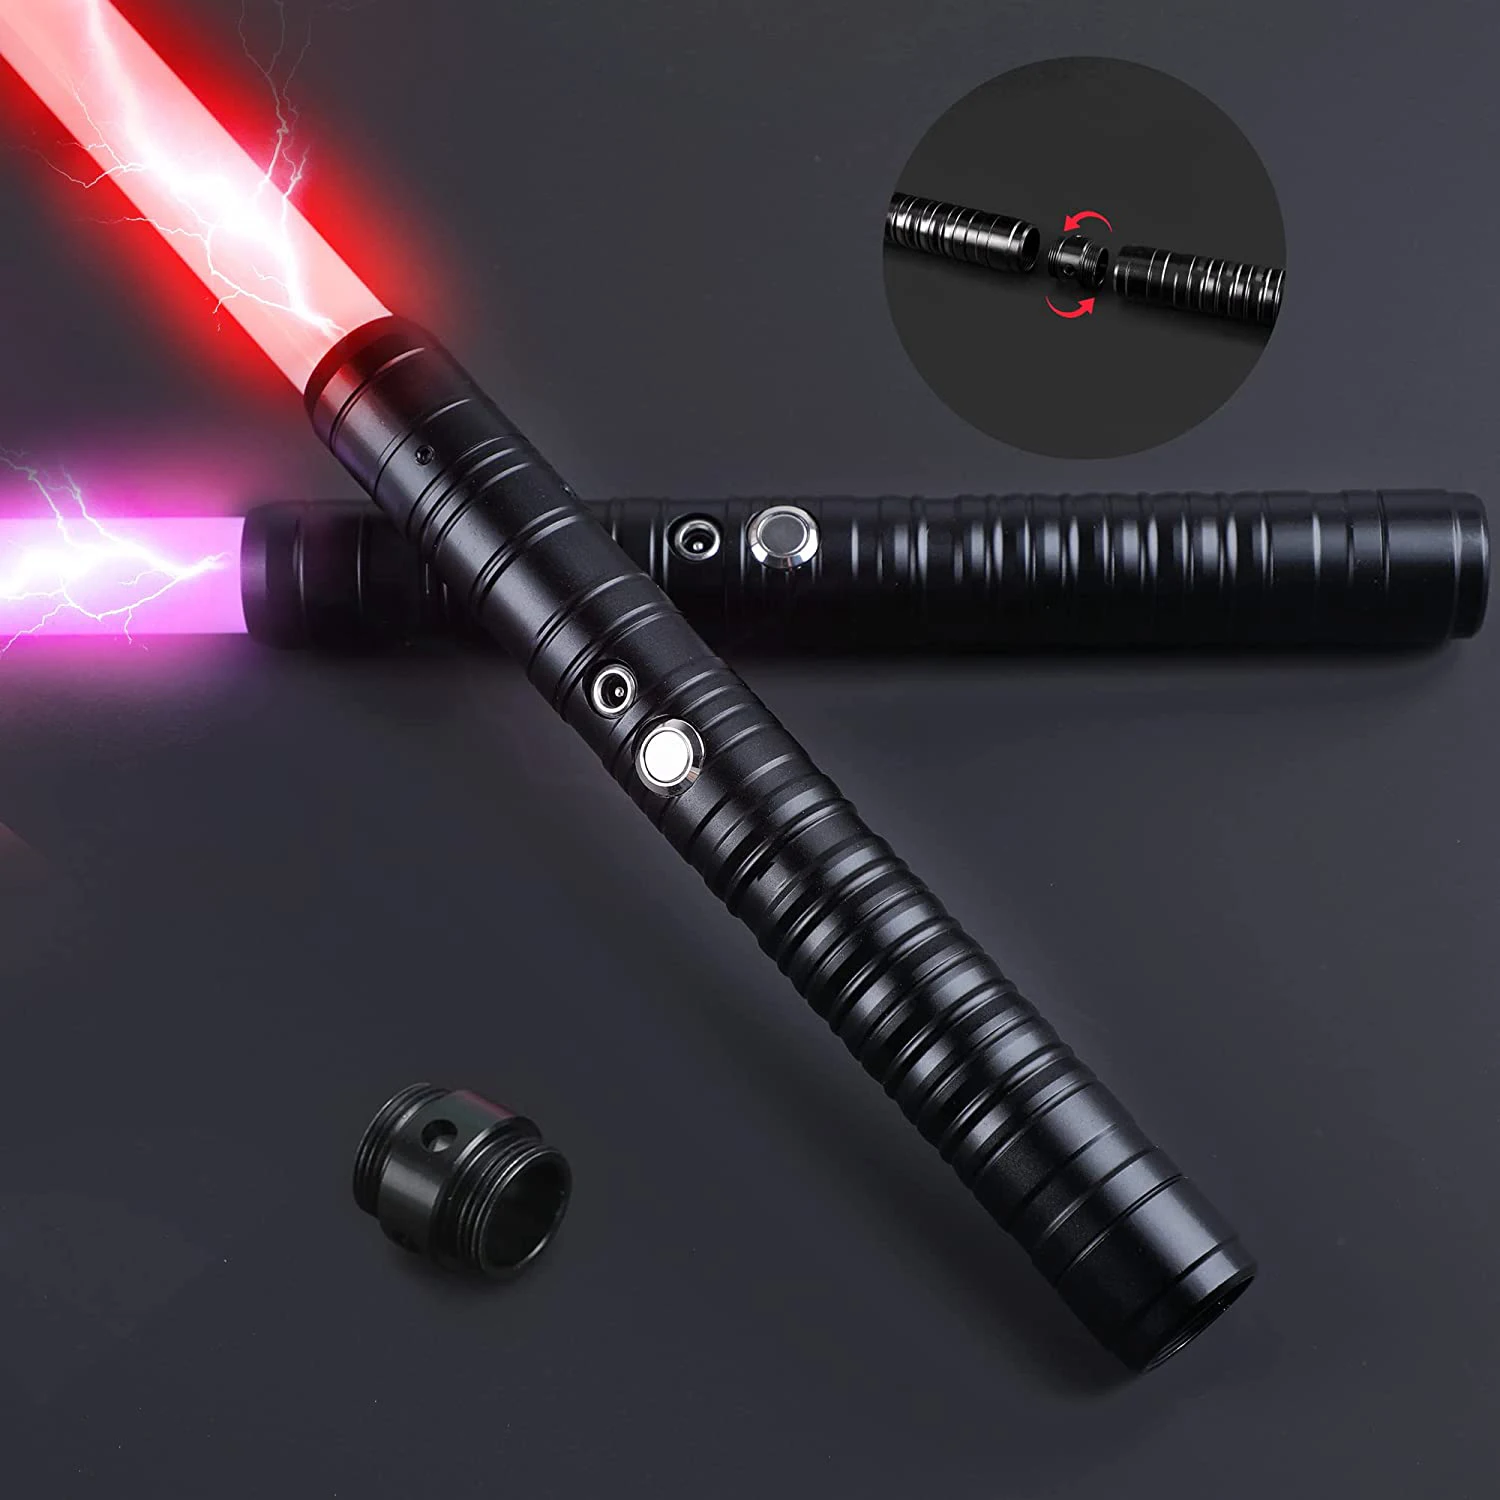 2pcs-pro-lightsaber-xenopixel-rgb-metal-handle-laser-sword-toys-with-gravity-sensing-sound-effects-cosplay-laser-sword-toy